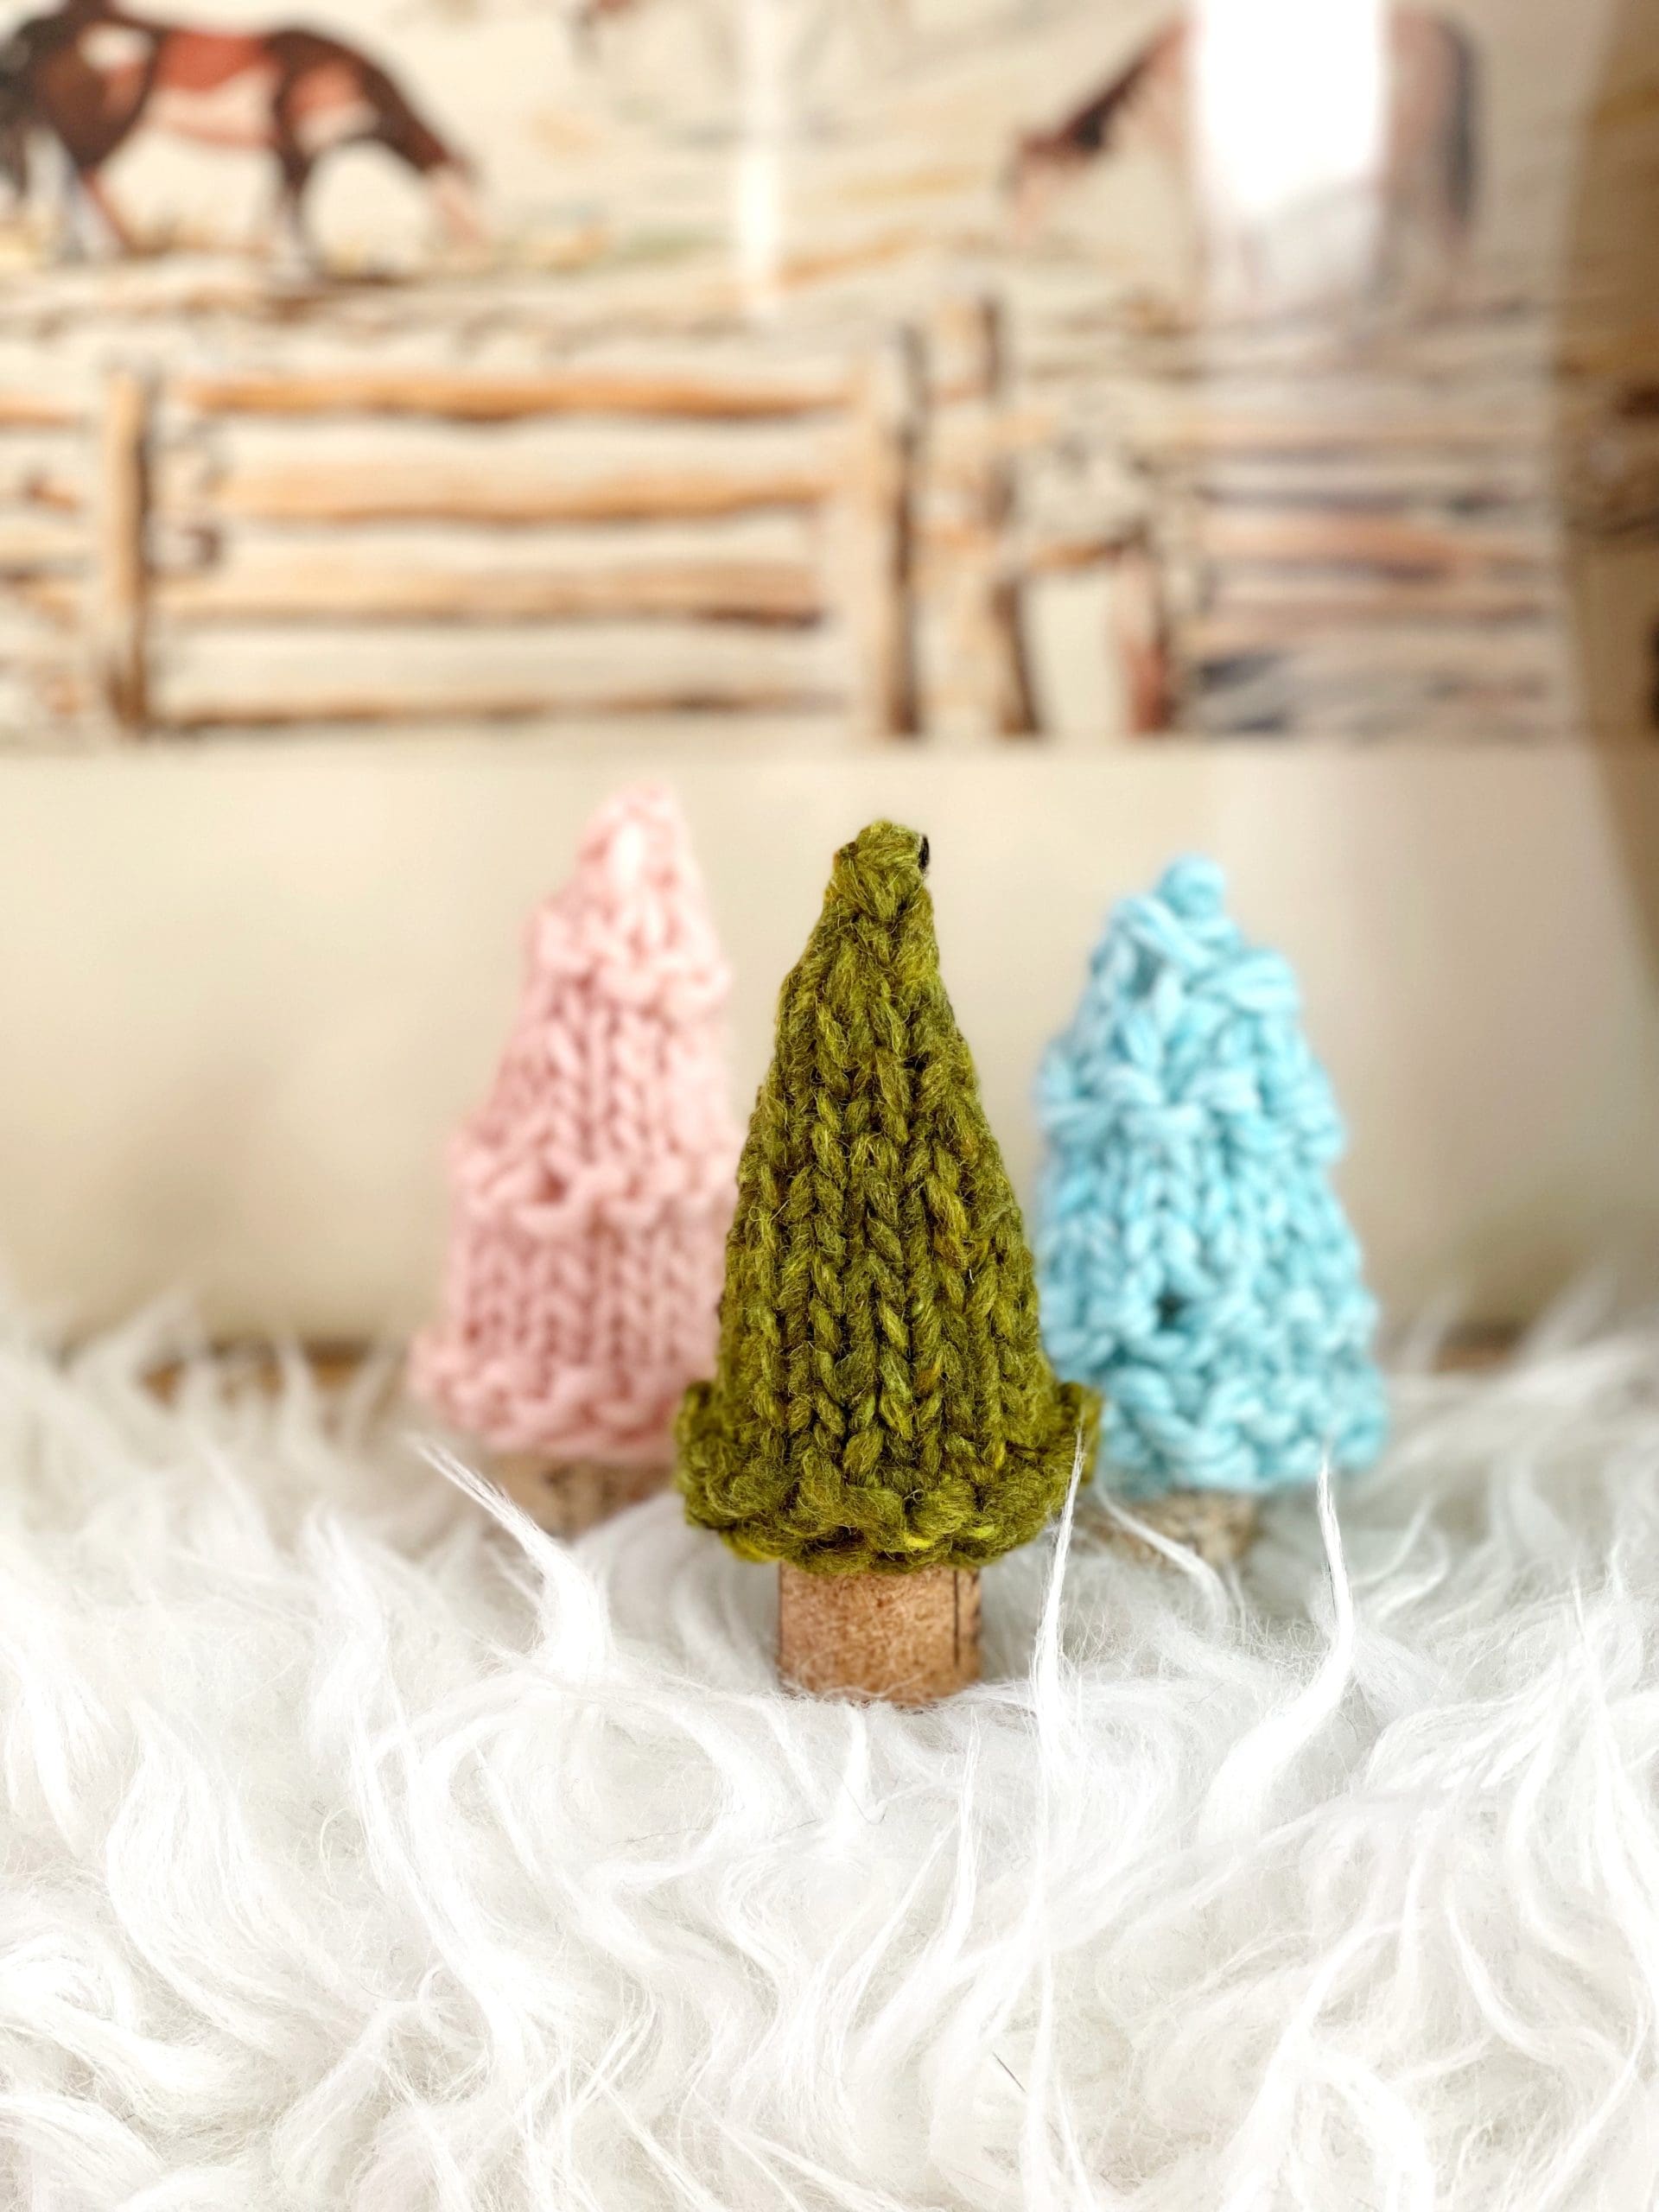 Wine Cork Knit Trees VIDEO & Patterns by Vickie Howell